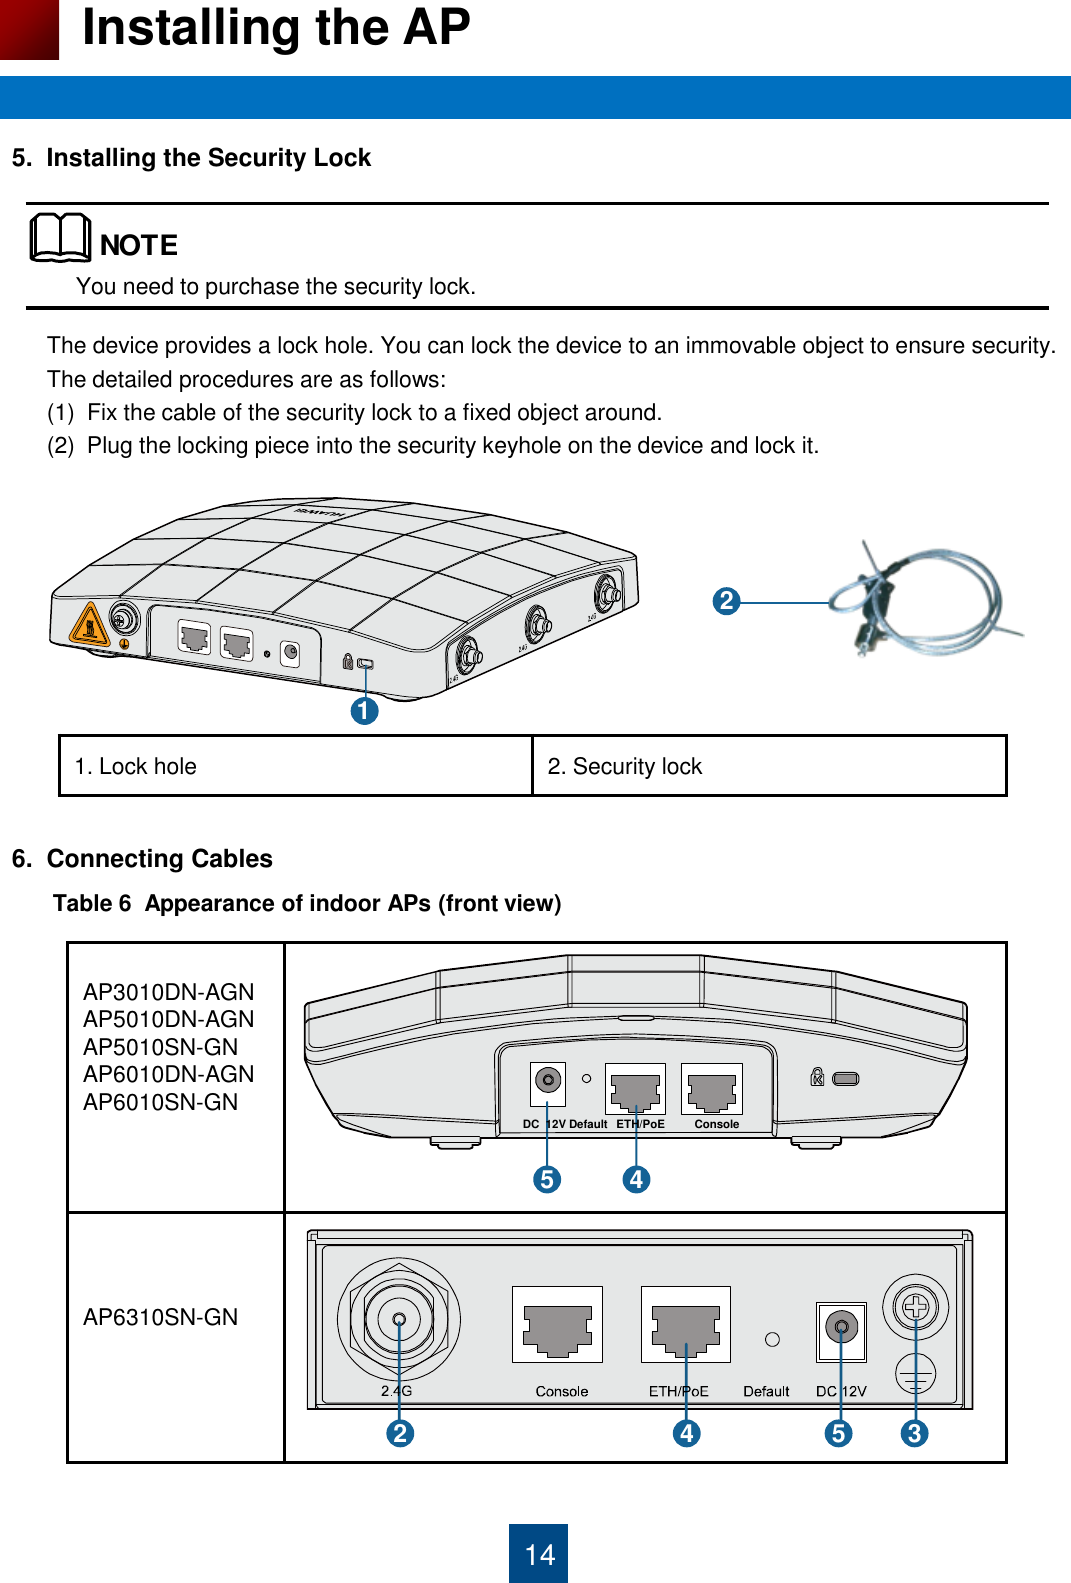 6.  Connecting Cables                                       5.  Installing the Security Lock                                       14 Installing the AP You need to purchase the security lock. 2 1. Lock hole 2. Security lock The device provides a lock hole. You can lock the device to an immovable object to ensure security. The detailed procedures are as follows:  (1)  Fix the cable of the security lock to a fixed object around. (2)  Plug the locking piece into the security keyhole on the device and lock it. Table 6  Appearance of indoor APs (front view)  AP3010DN-AGN AP5010DN-AGN AP5010SN-GN AP6010DN-AGN AP6010SN-GN      AP6310SN-GN  4 Console ETH/PoE Default  DC  12V  5 2  4  3 5 1 NOTE